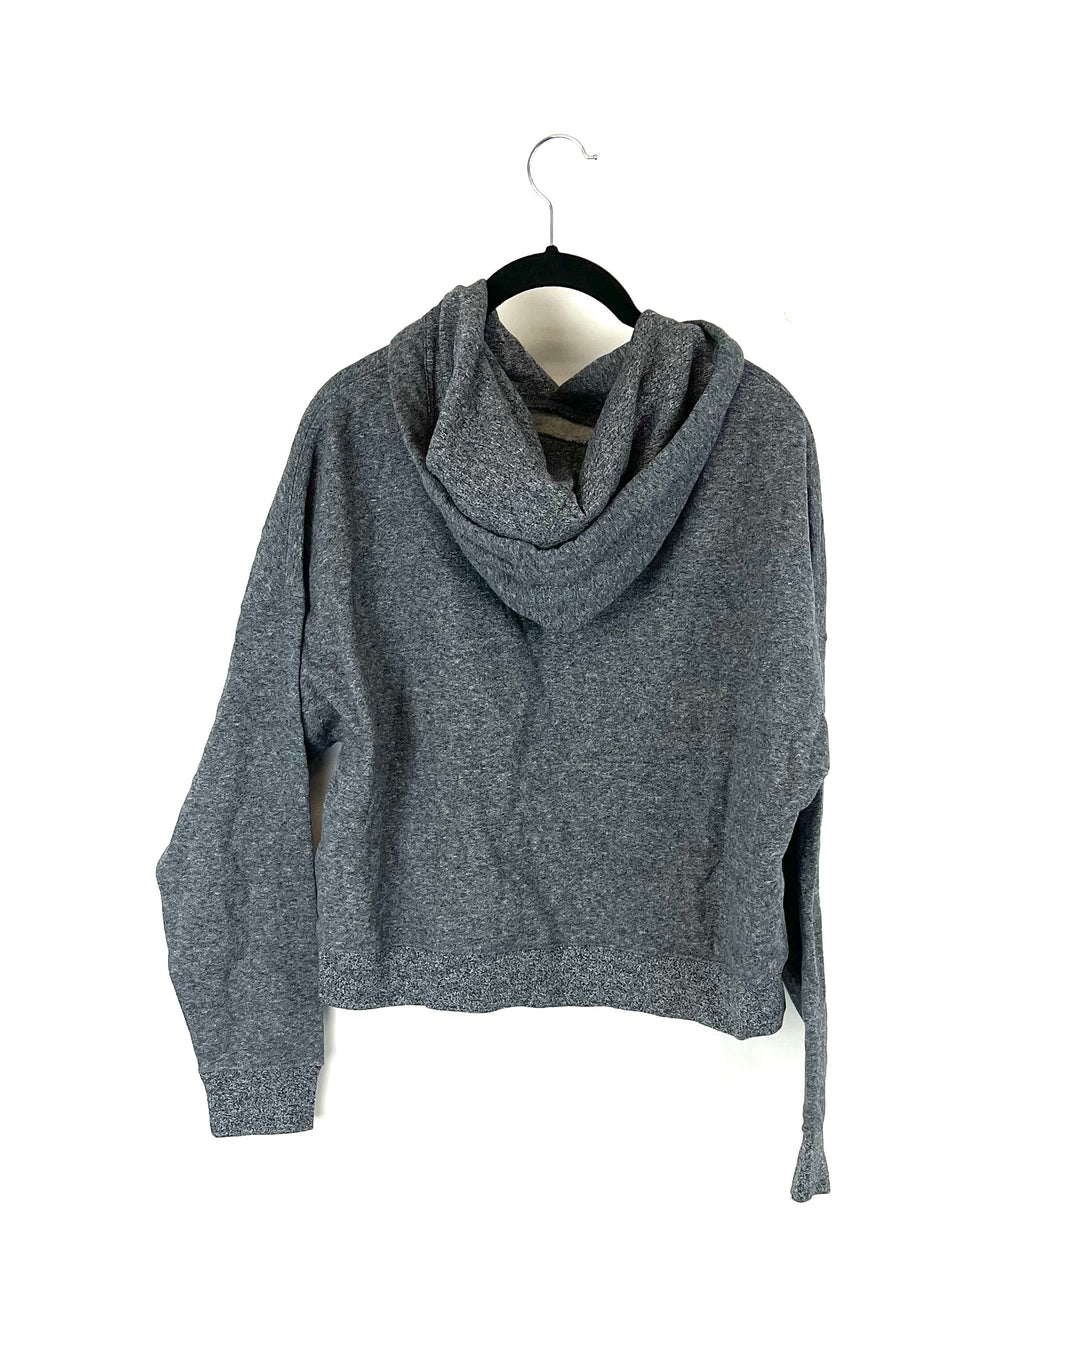 Cropped Heather Gray Hoodie - Small